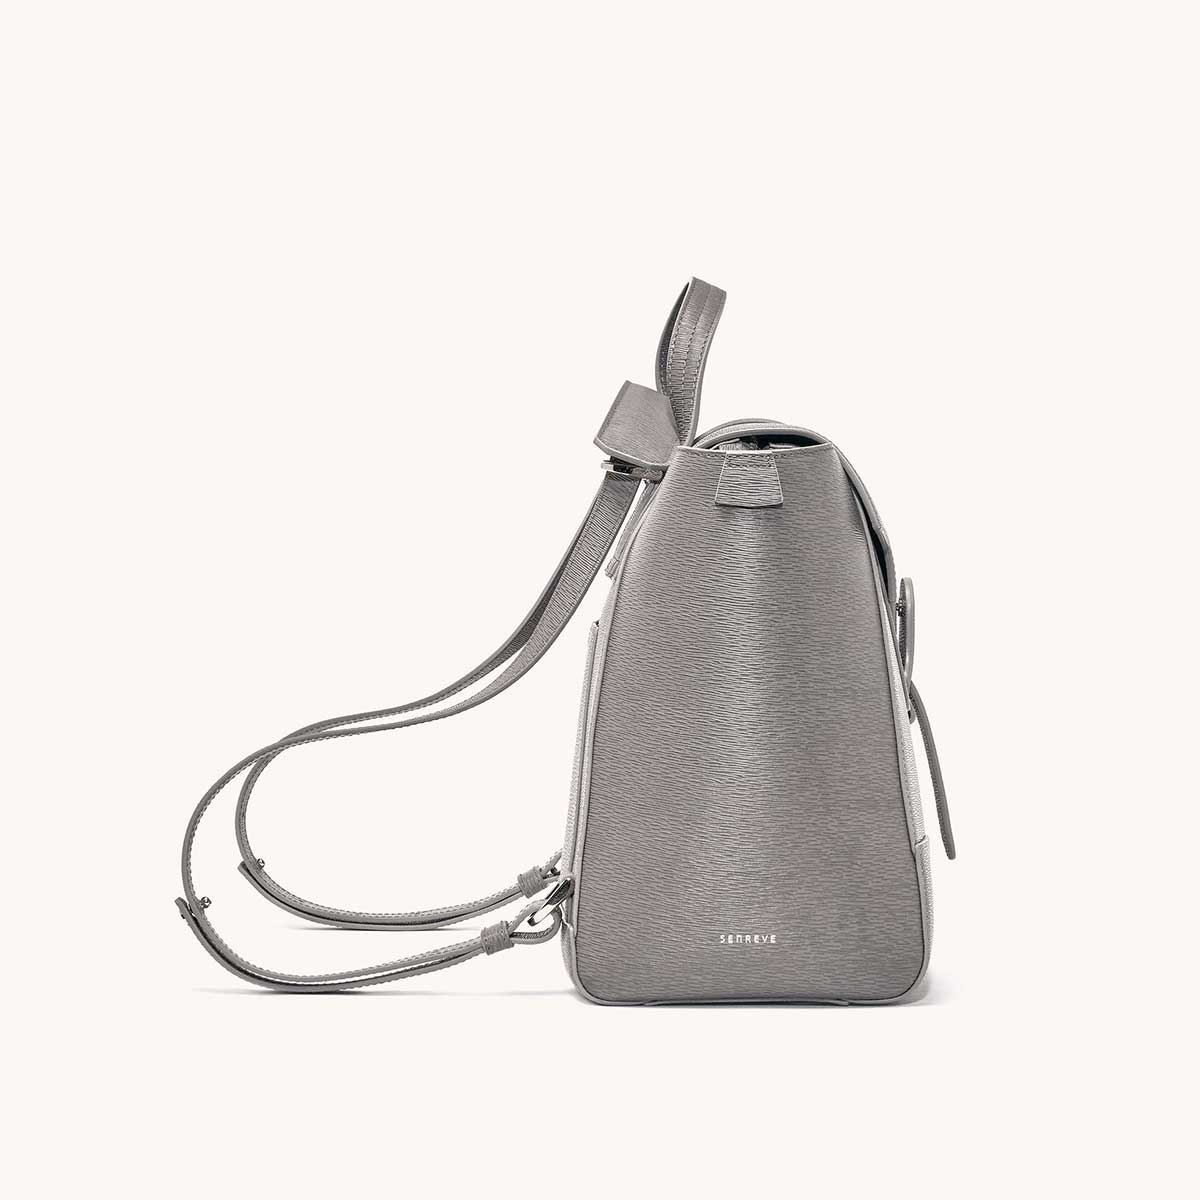 Maestra Bag Mimosa Storm with Silver Hardware Side View